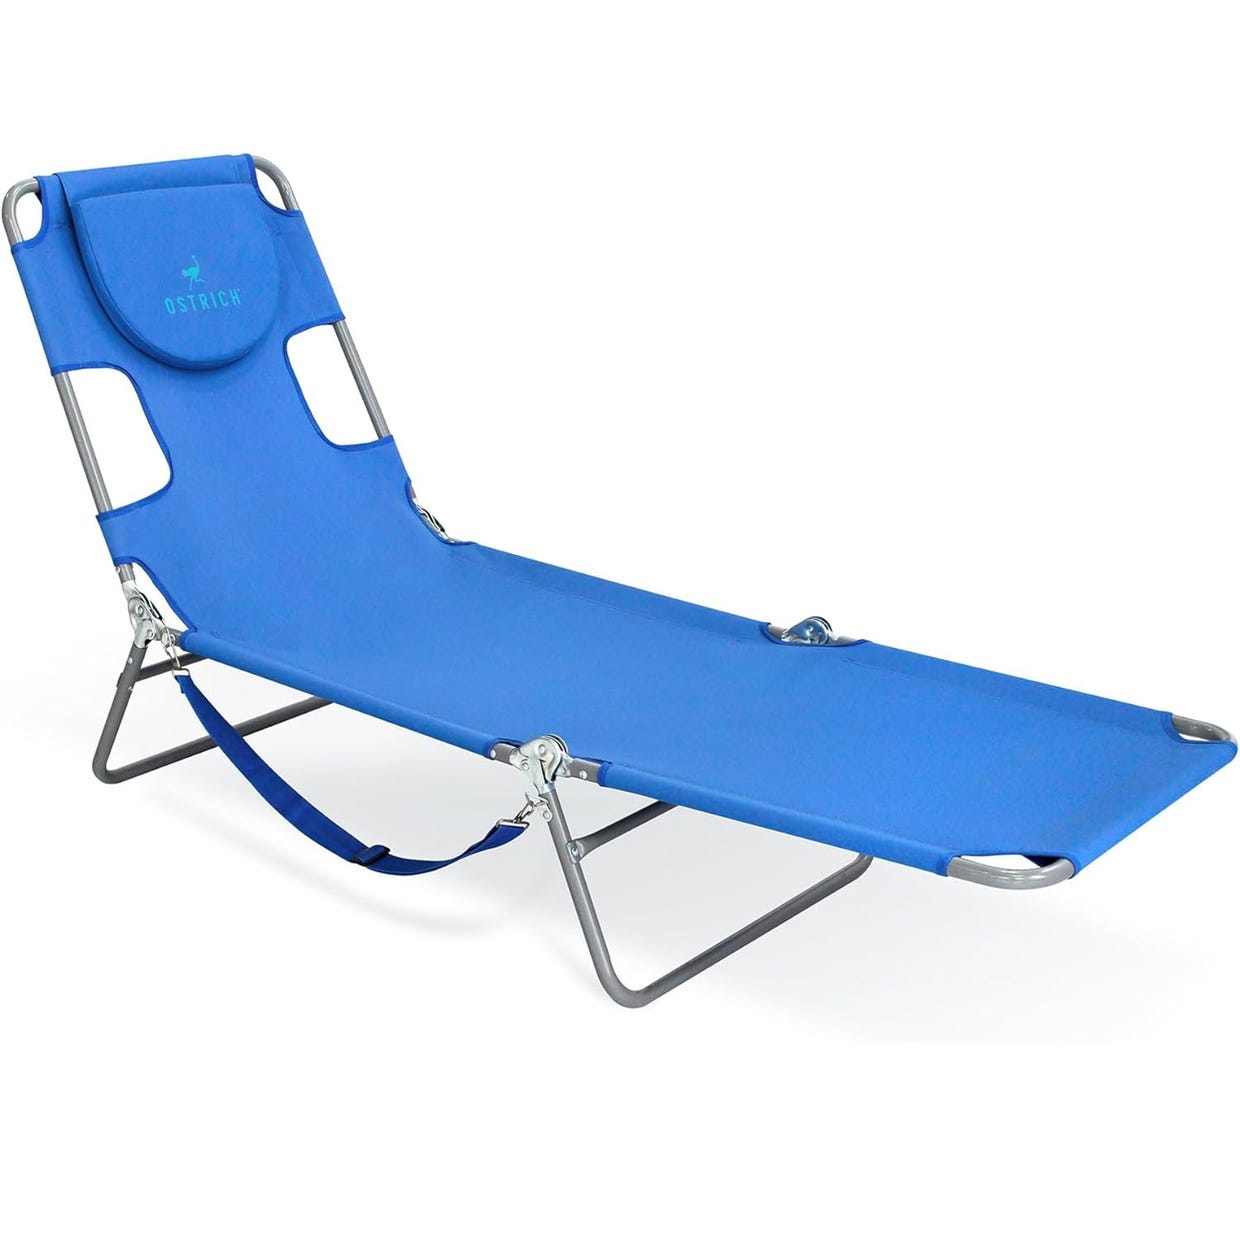 Blue folding beach lounger with a headrest and armholes.